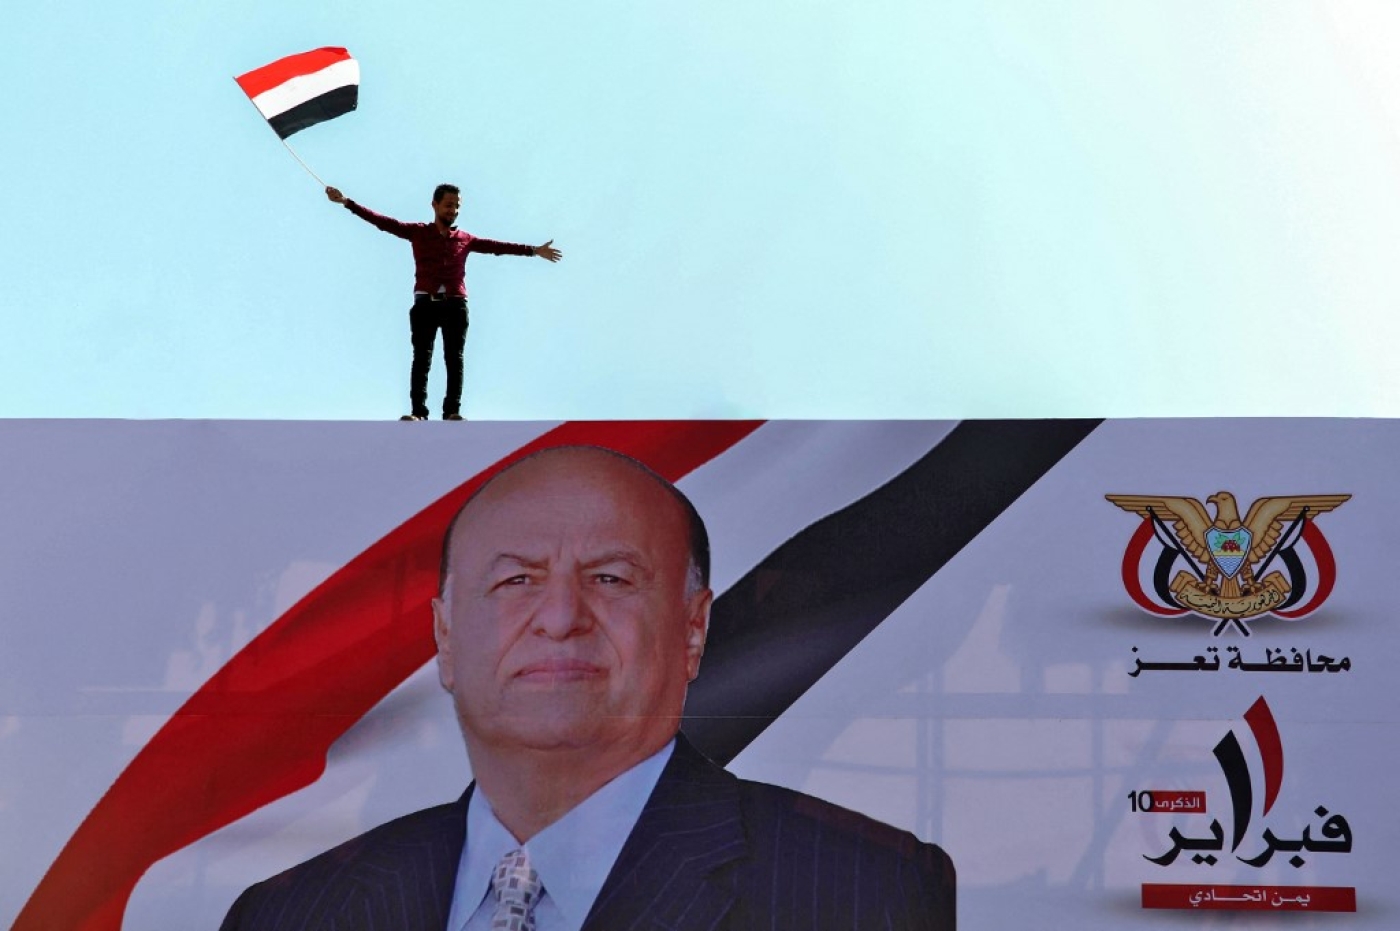 A Yemeni waves the country's national flag on a billboard showing President Abd Rabbuh Mansour Hadi 